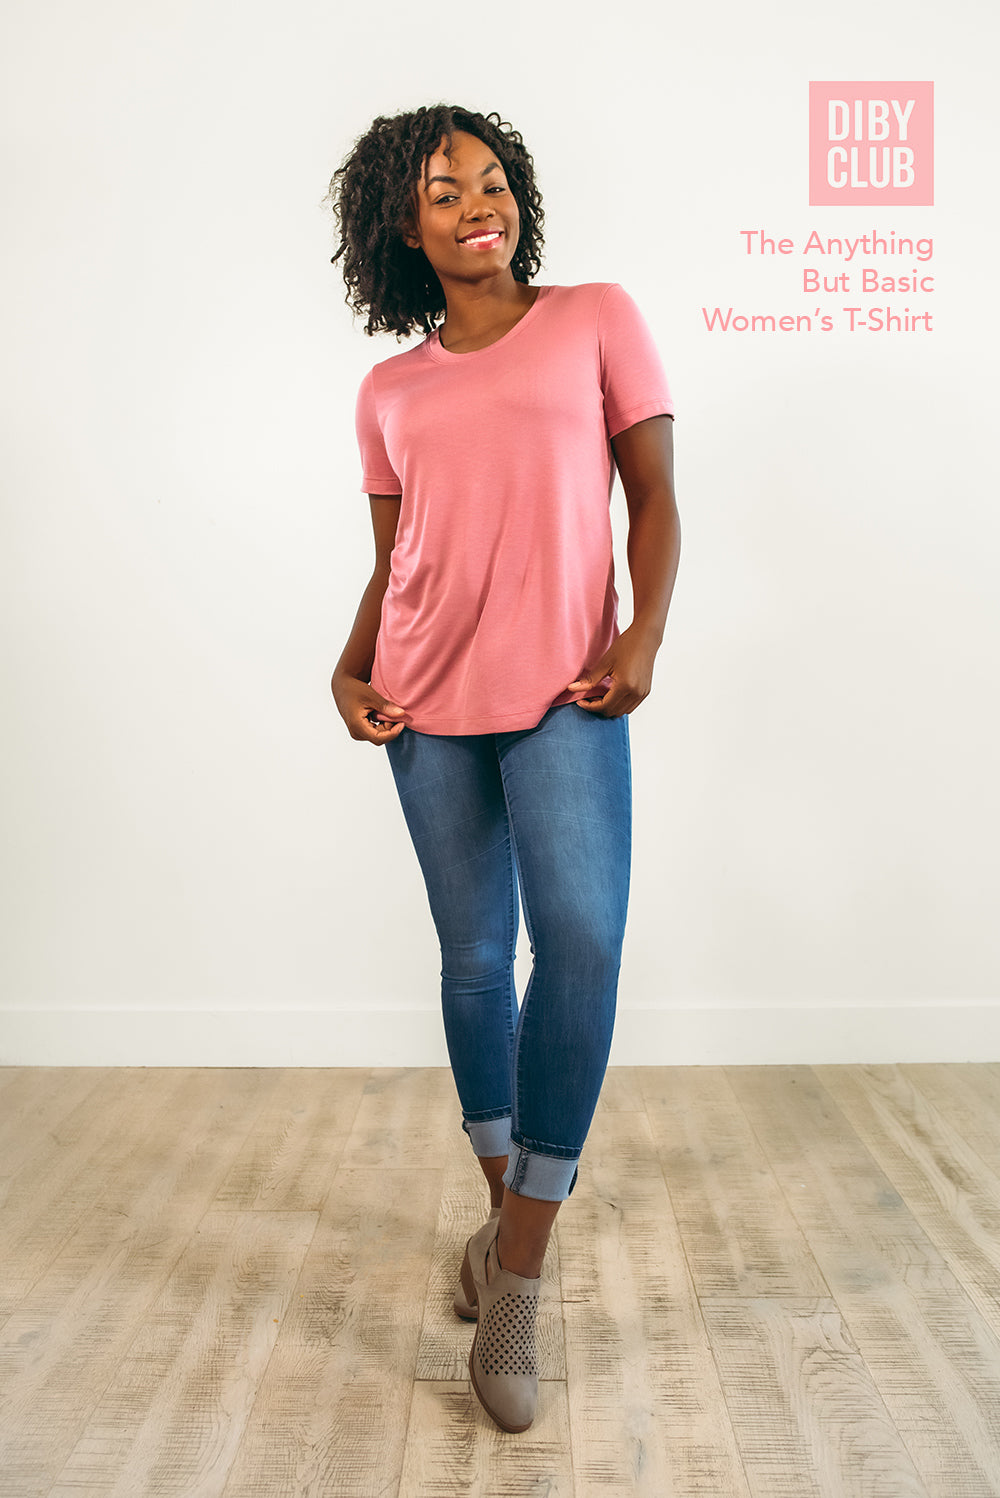 ABB Women's Shirt with short sleeves and crew neck. 